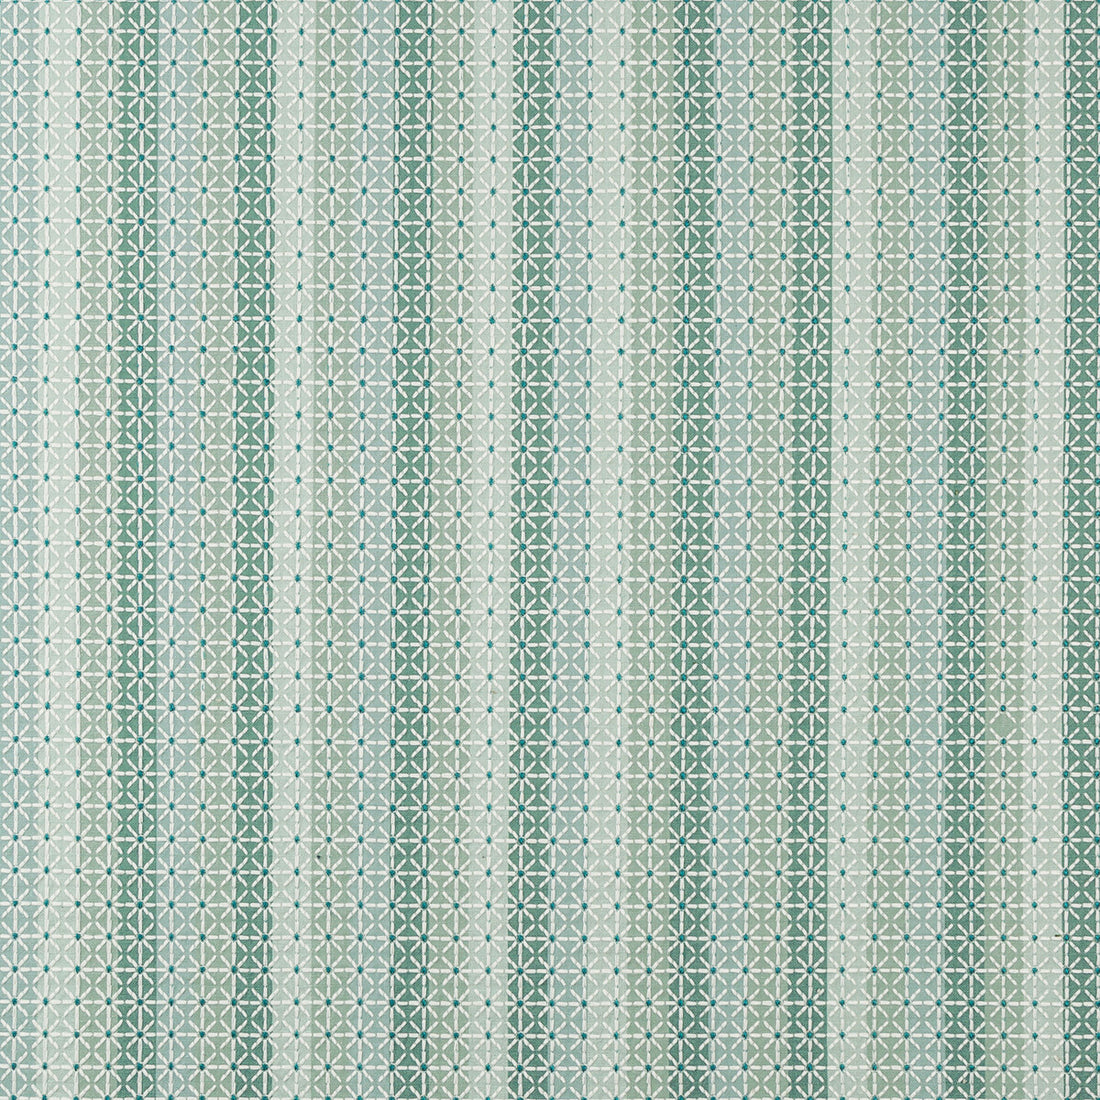 Bentota fabric in grotto color - pattern 35769.135.0 - by Kravet Basics in the Ceylon collection